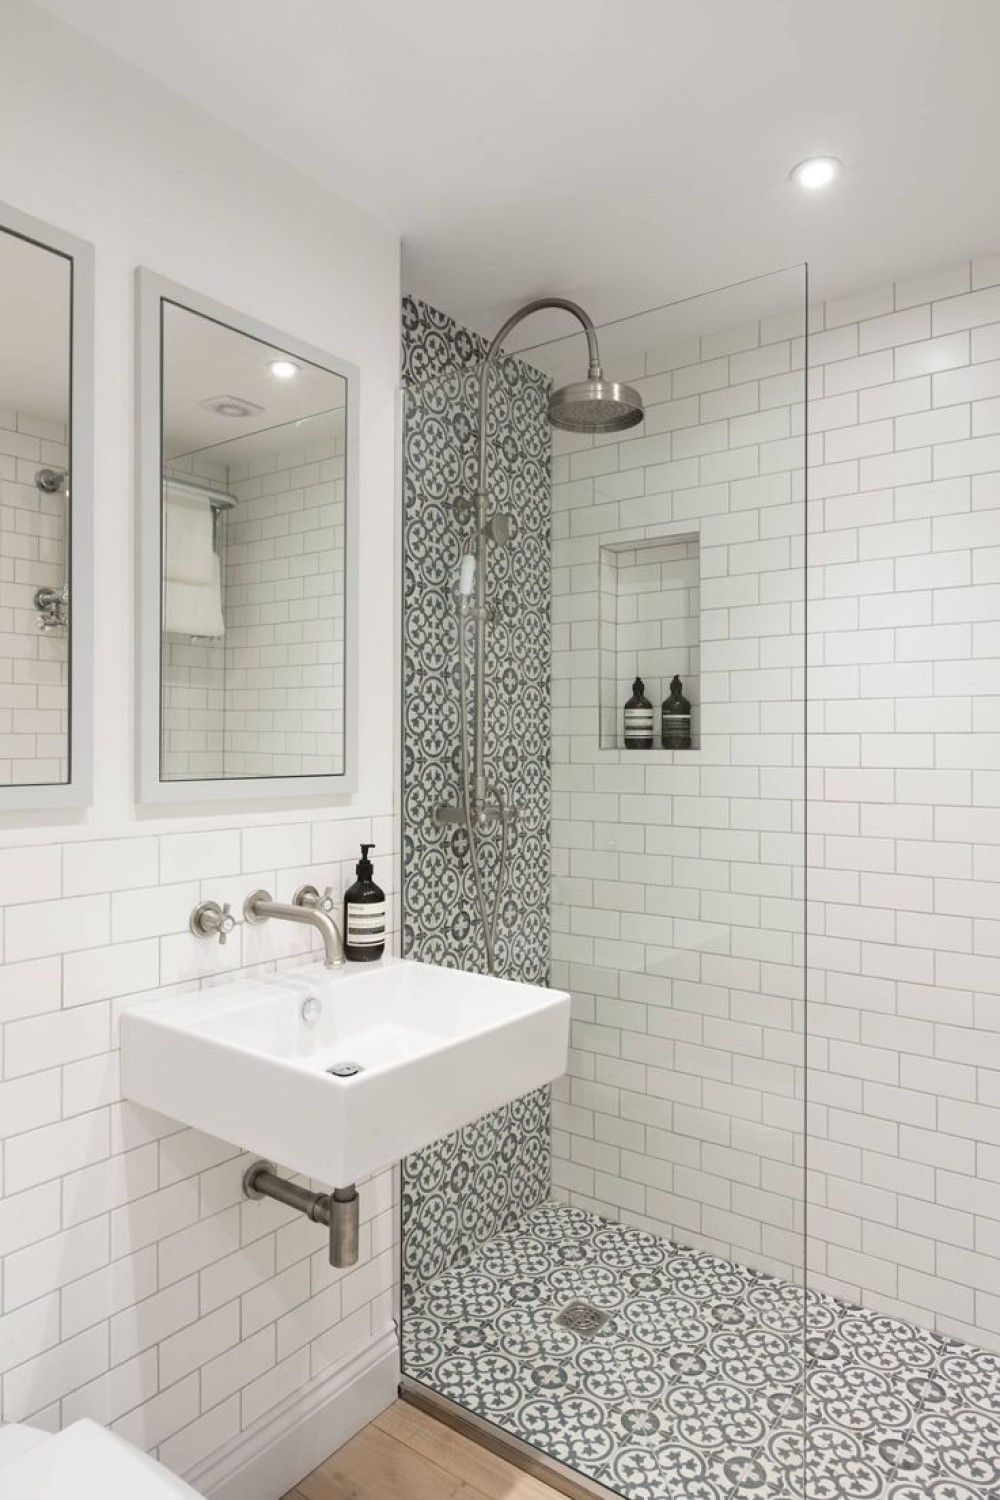 + Unique bathroom shower ideas that are simple and timeless